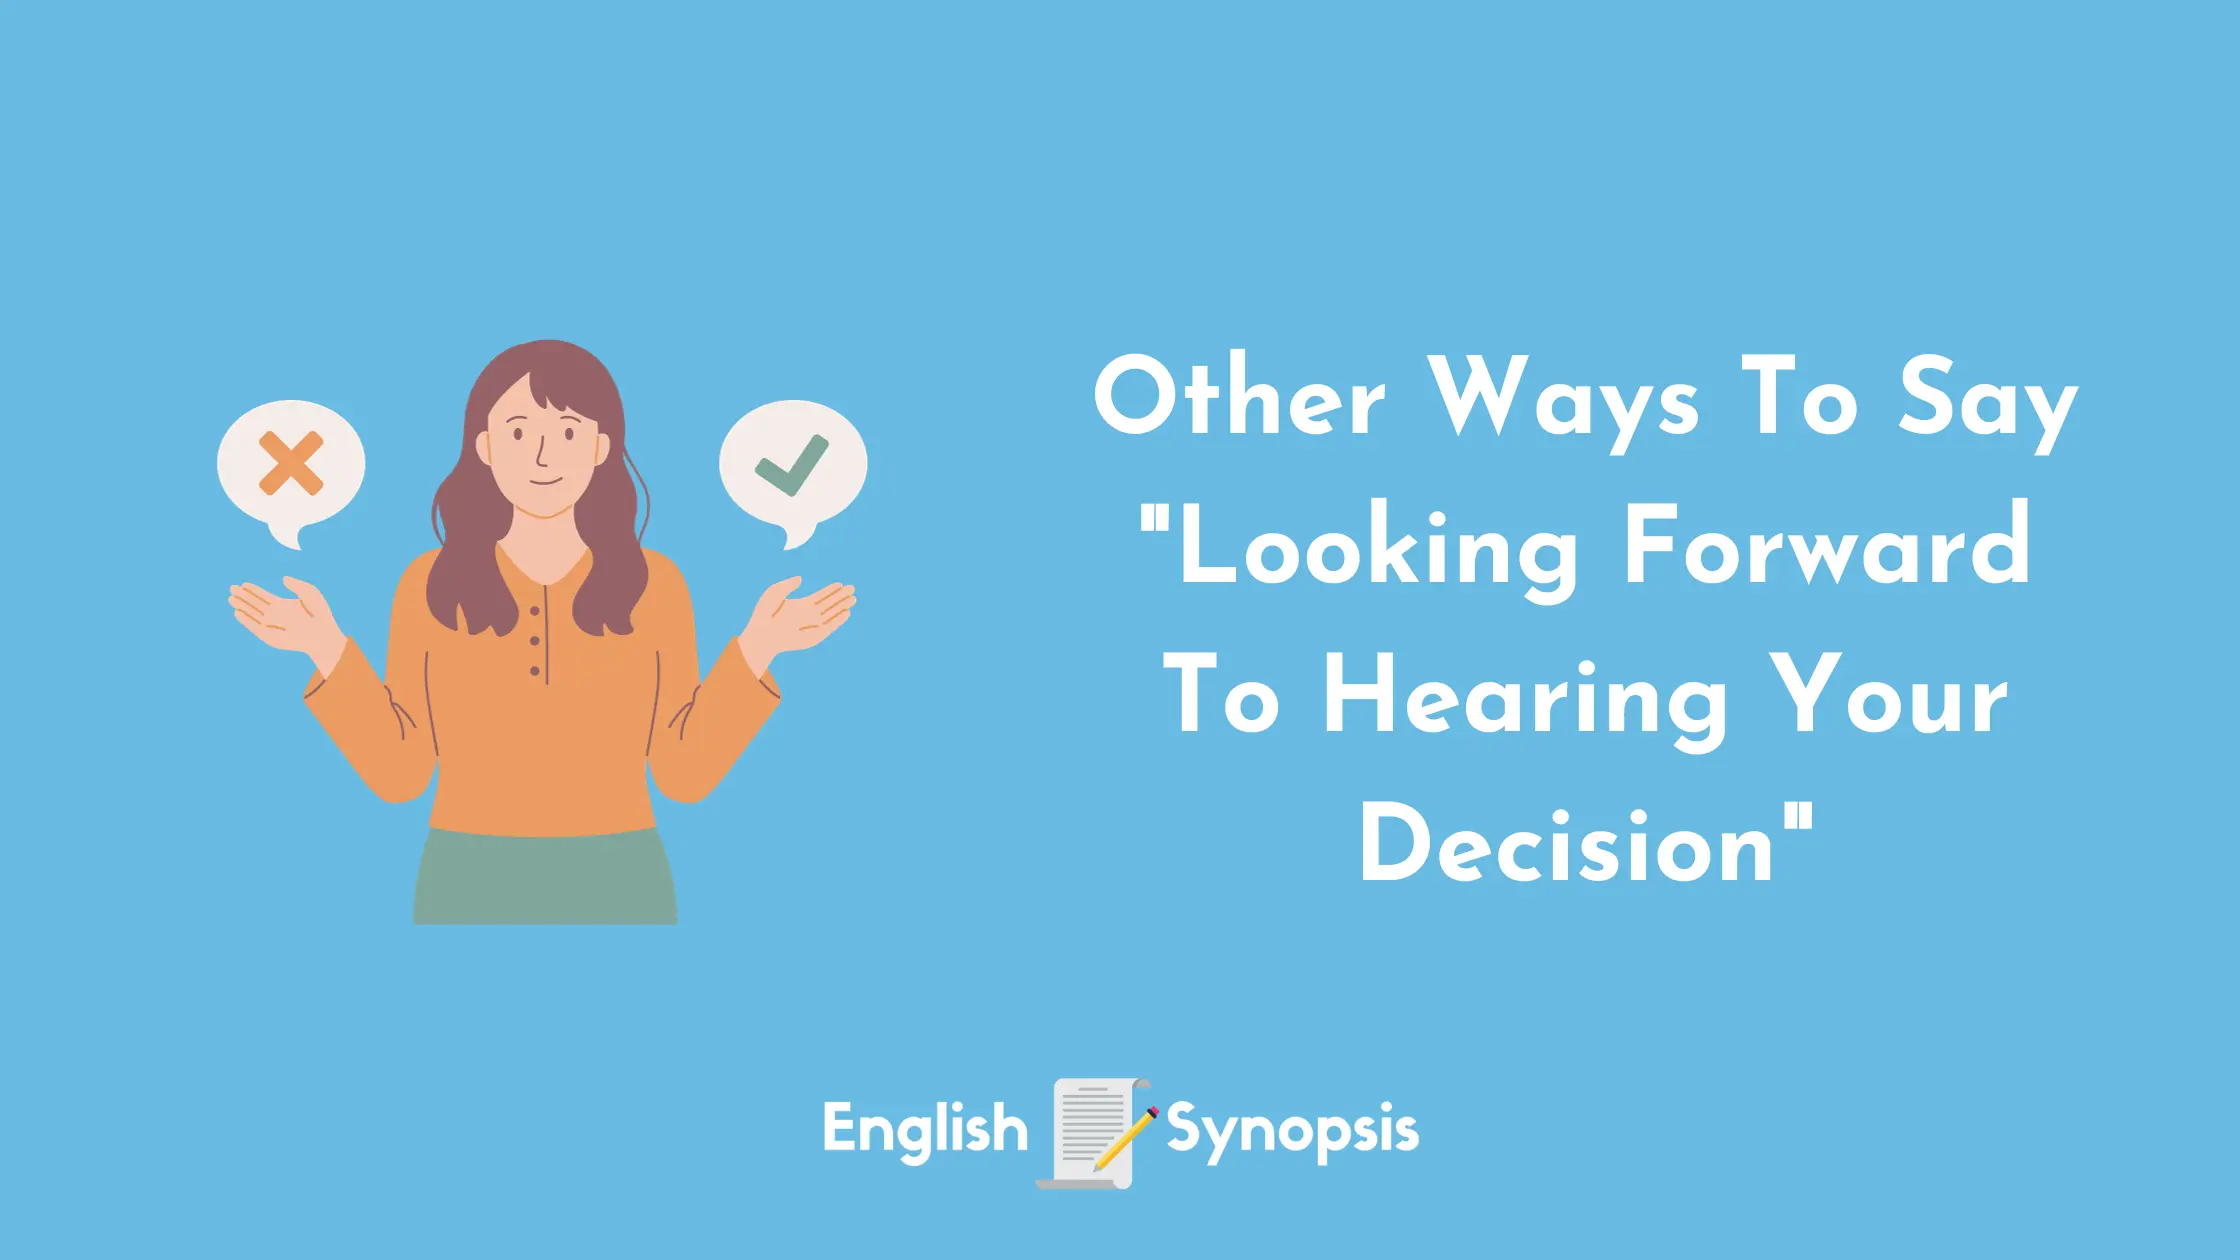 Other Ways To Say "Looking Forward To Hearing Your Decision"